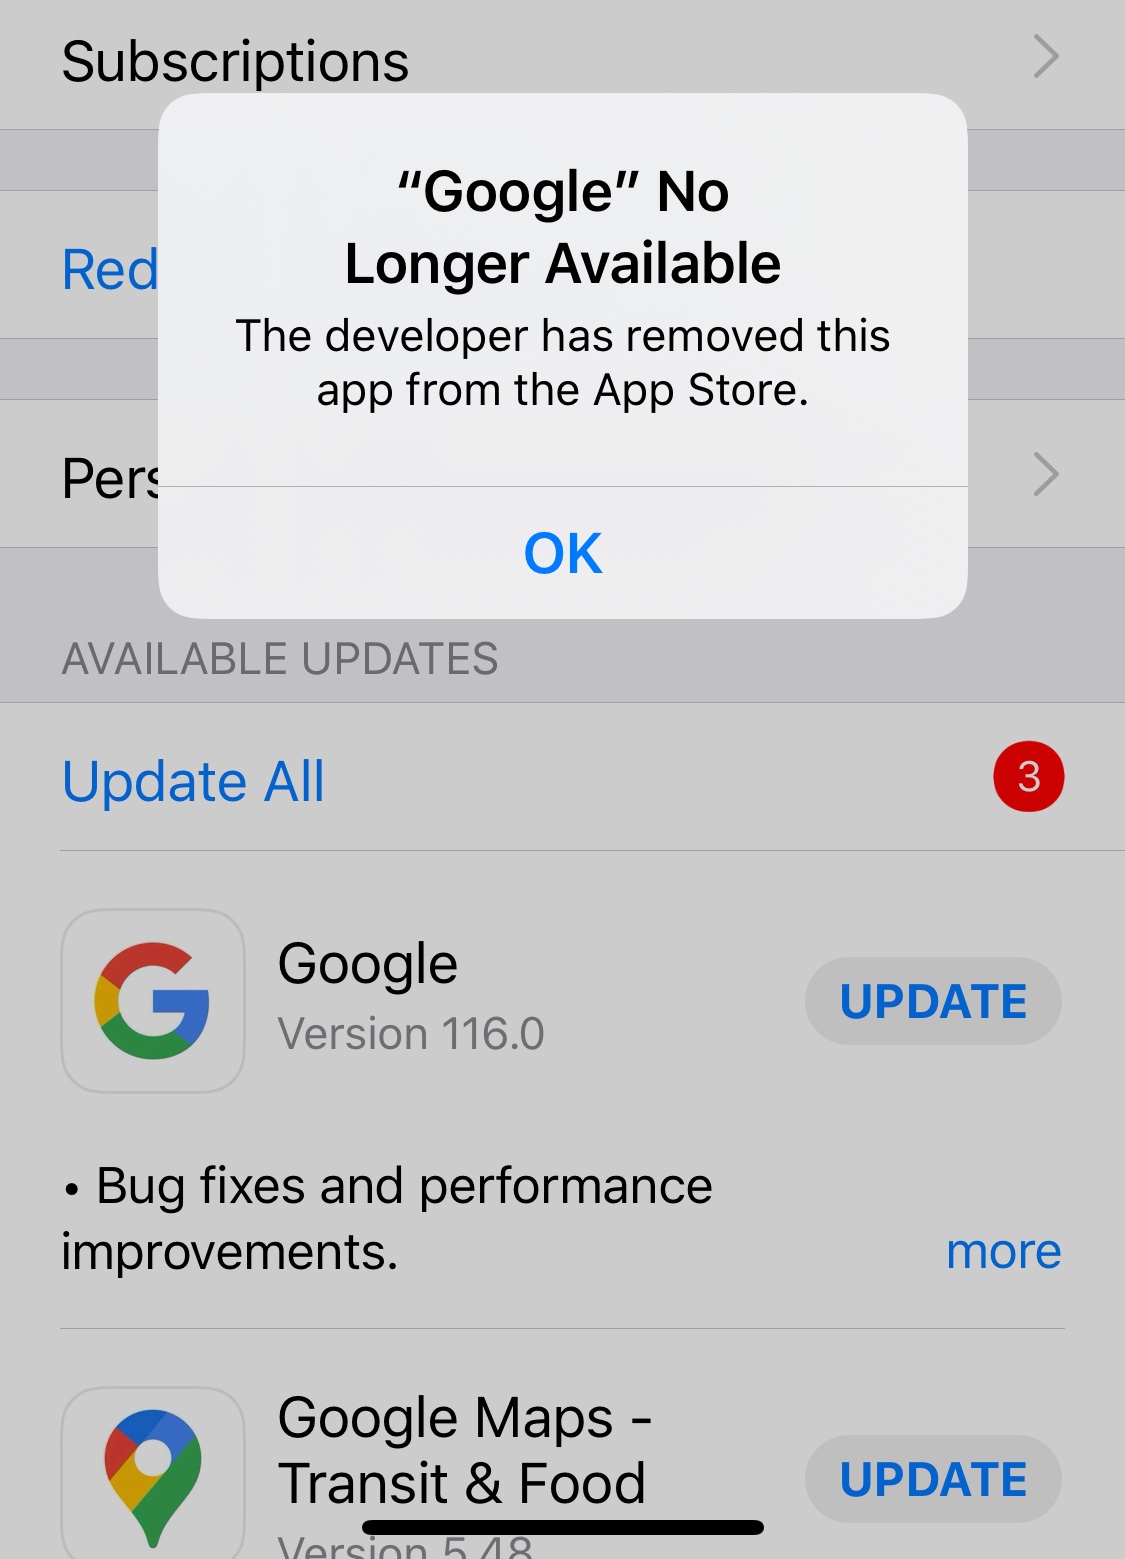 What happens when app is removed from App Store?